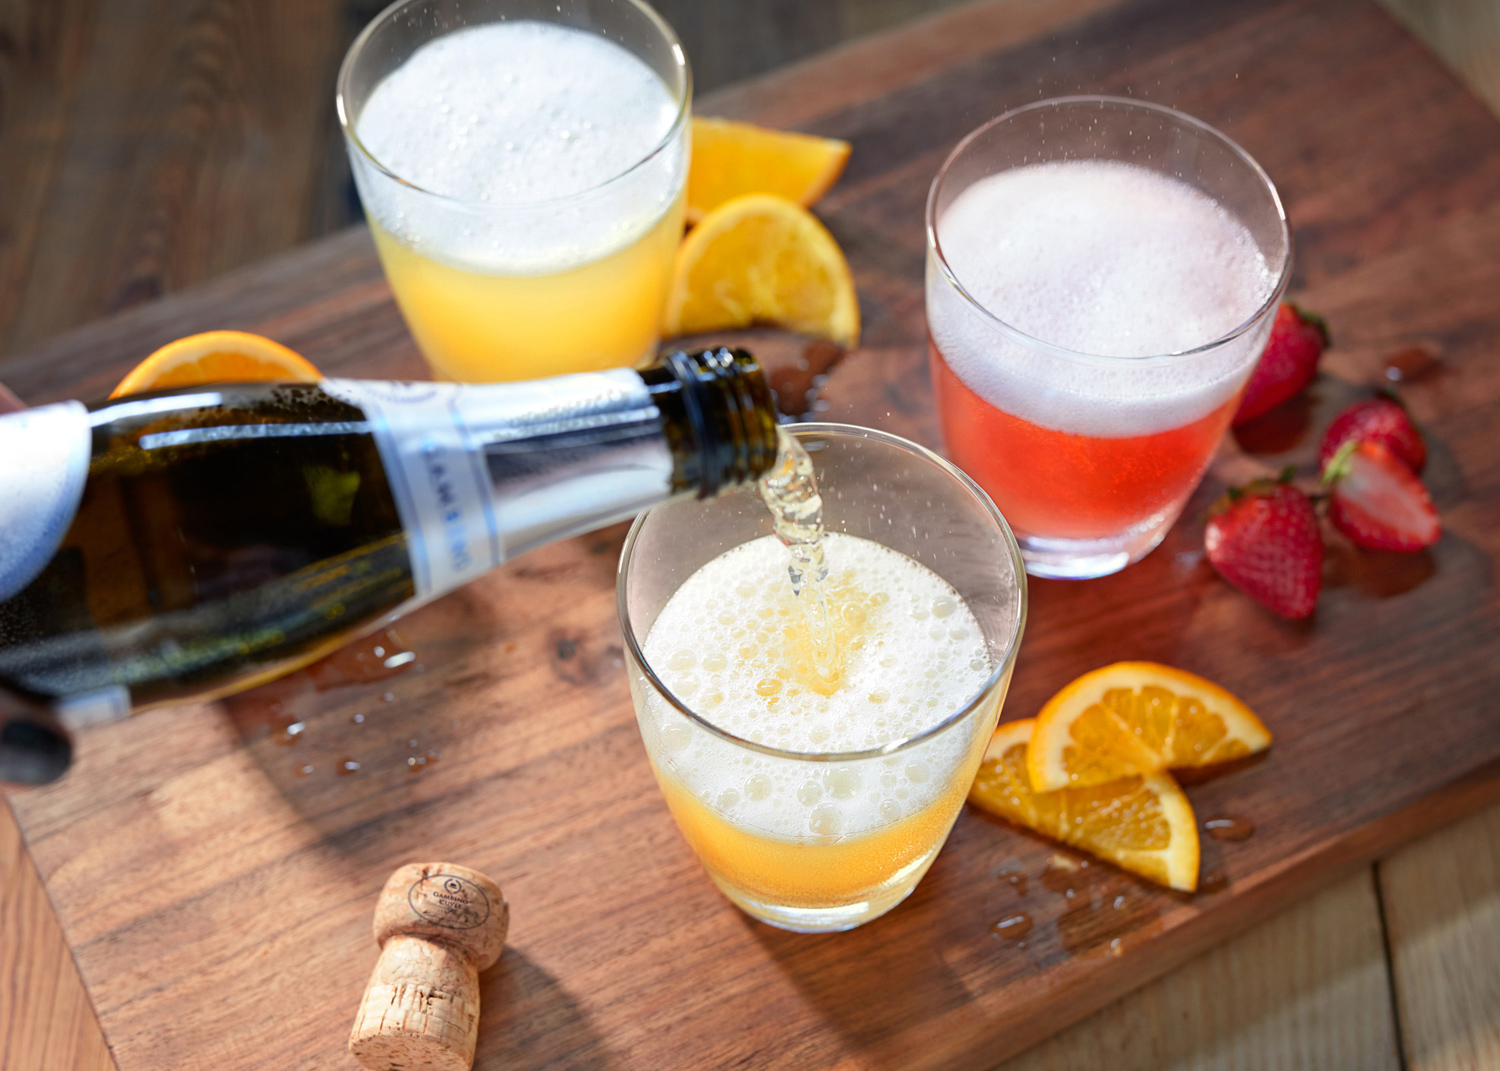 Pouring Mimosas on rustic table by food photographer Buff Strickland